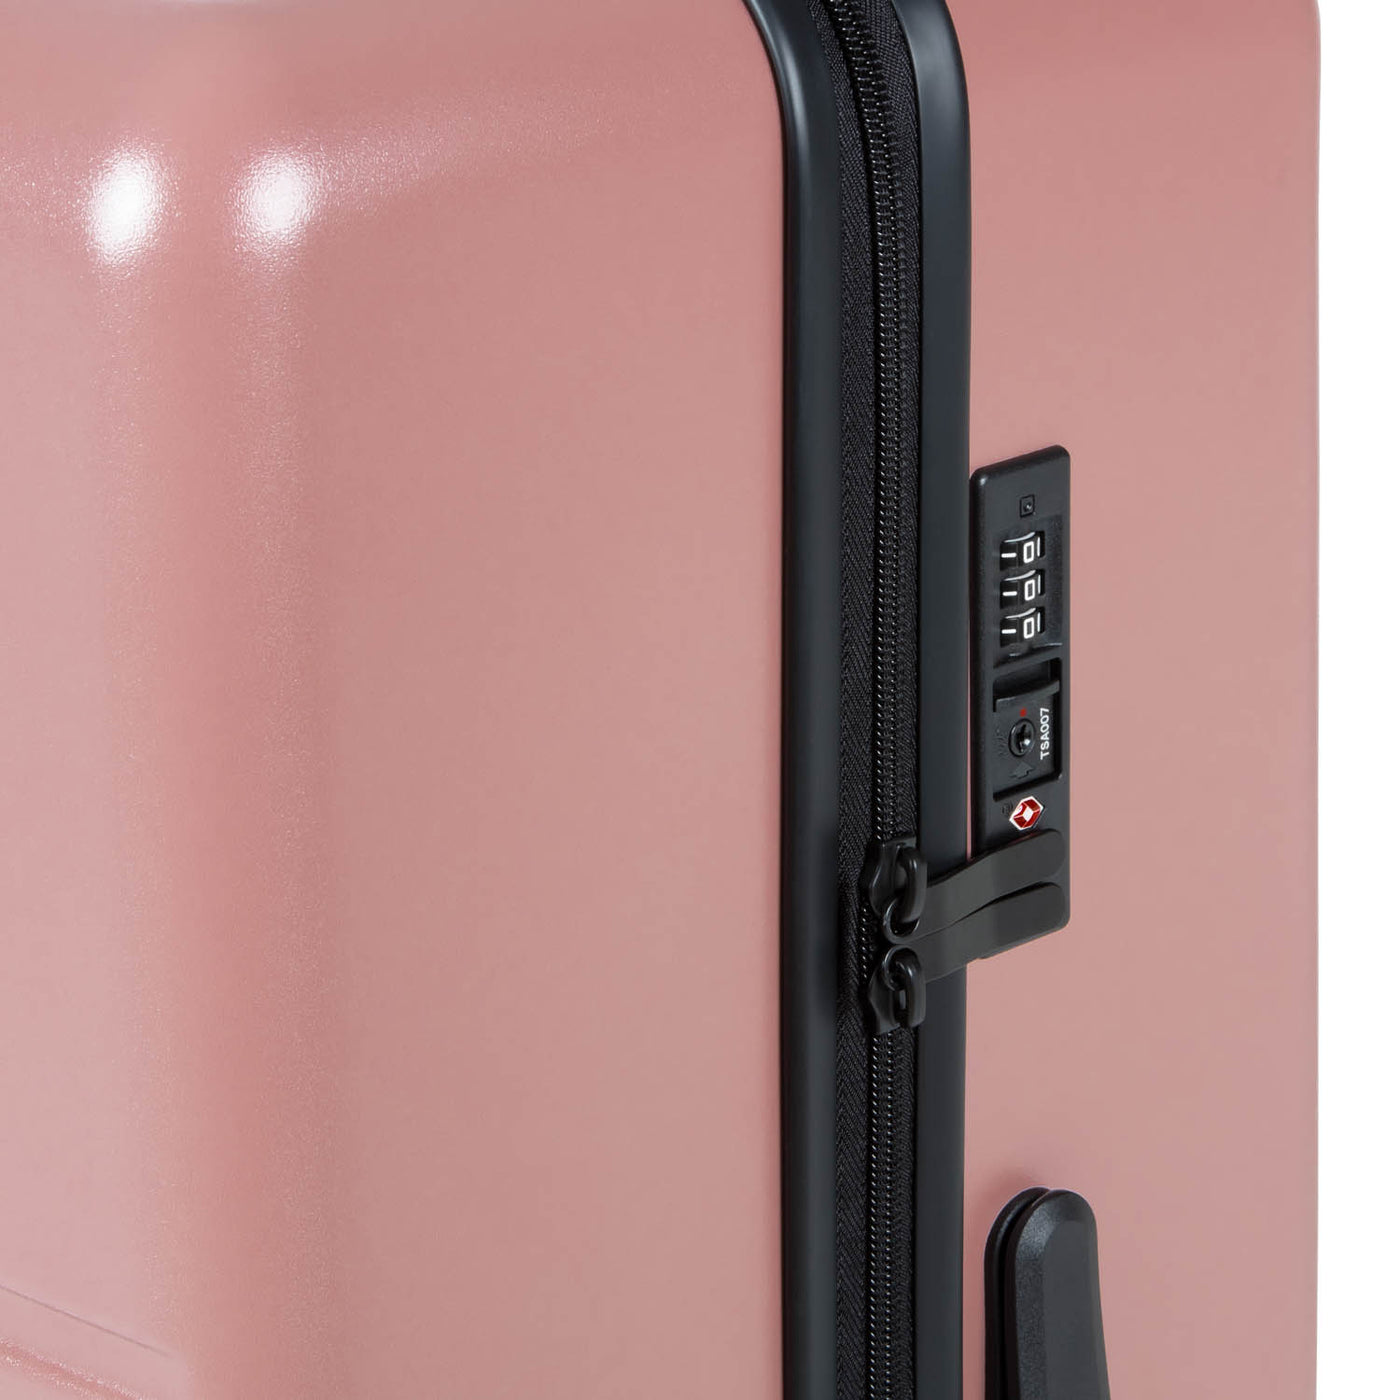 Valise soute - Bagages  #couleur_rose-antic